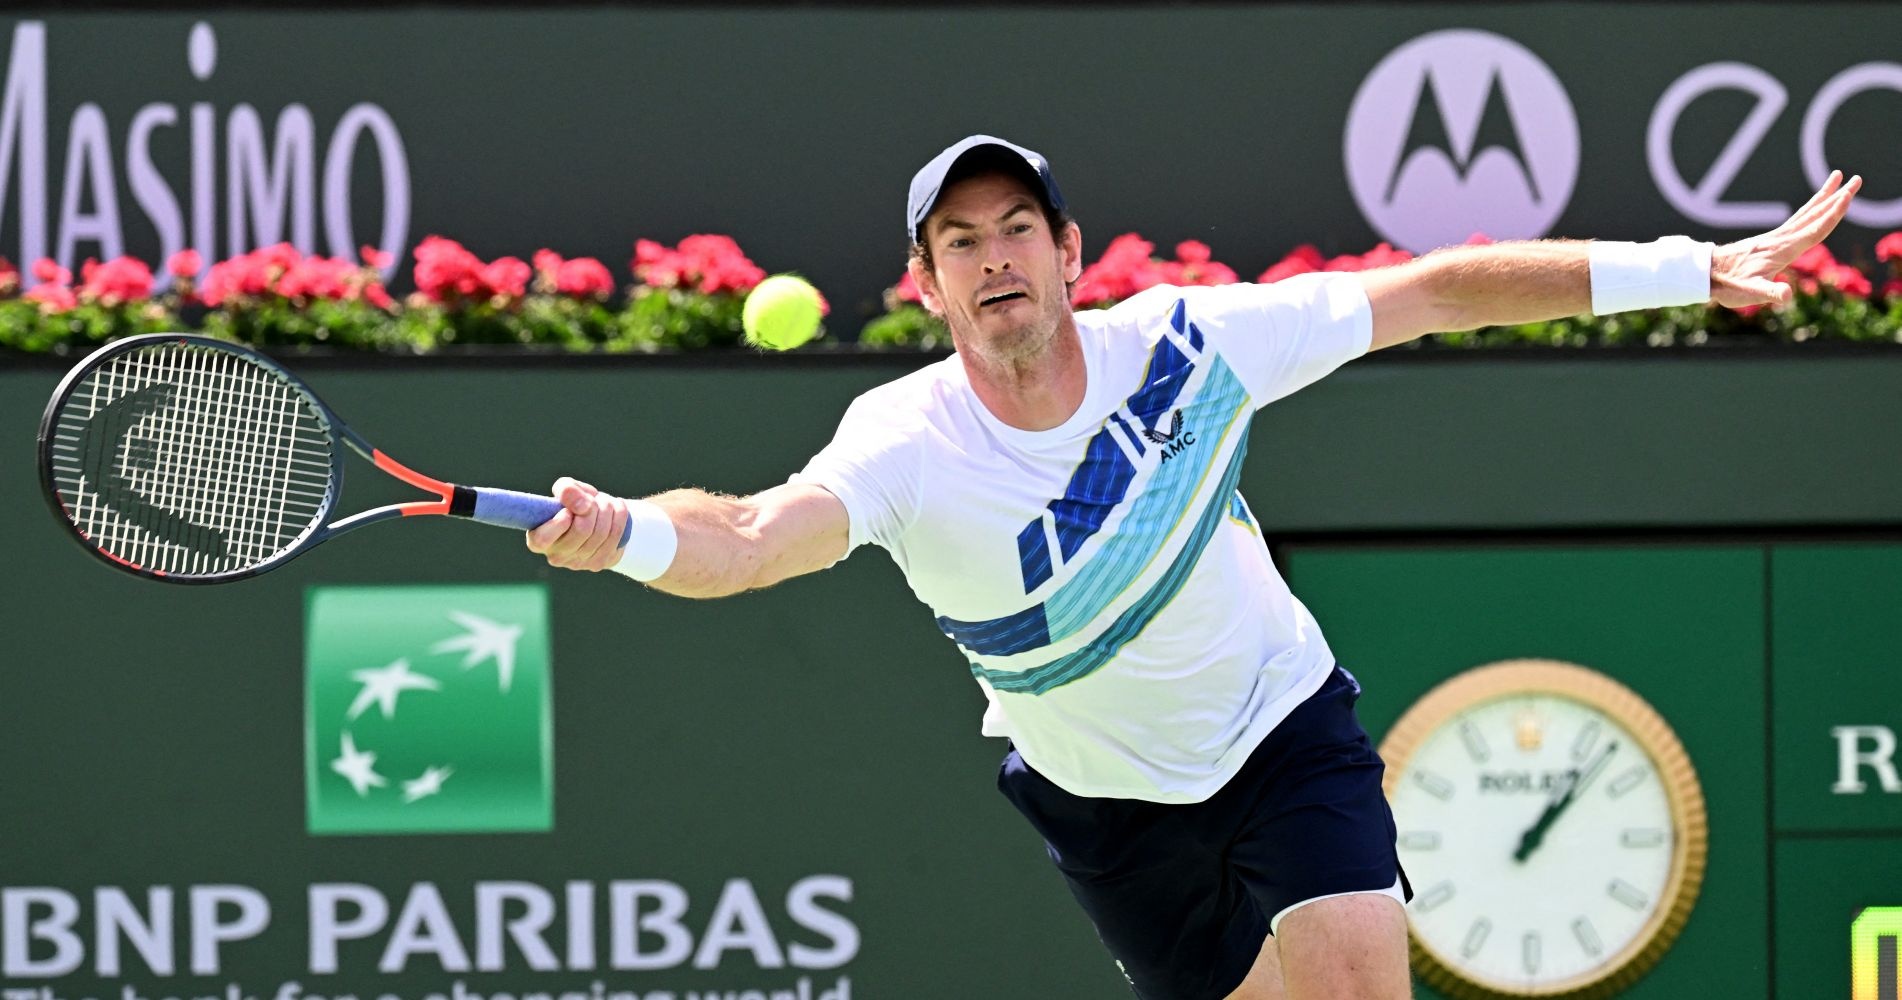 Andy Murray (GBR) during a second round match at the BNP Paribas Open at the Indian Wells Tennis Garden.